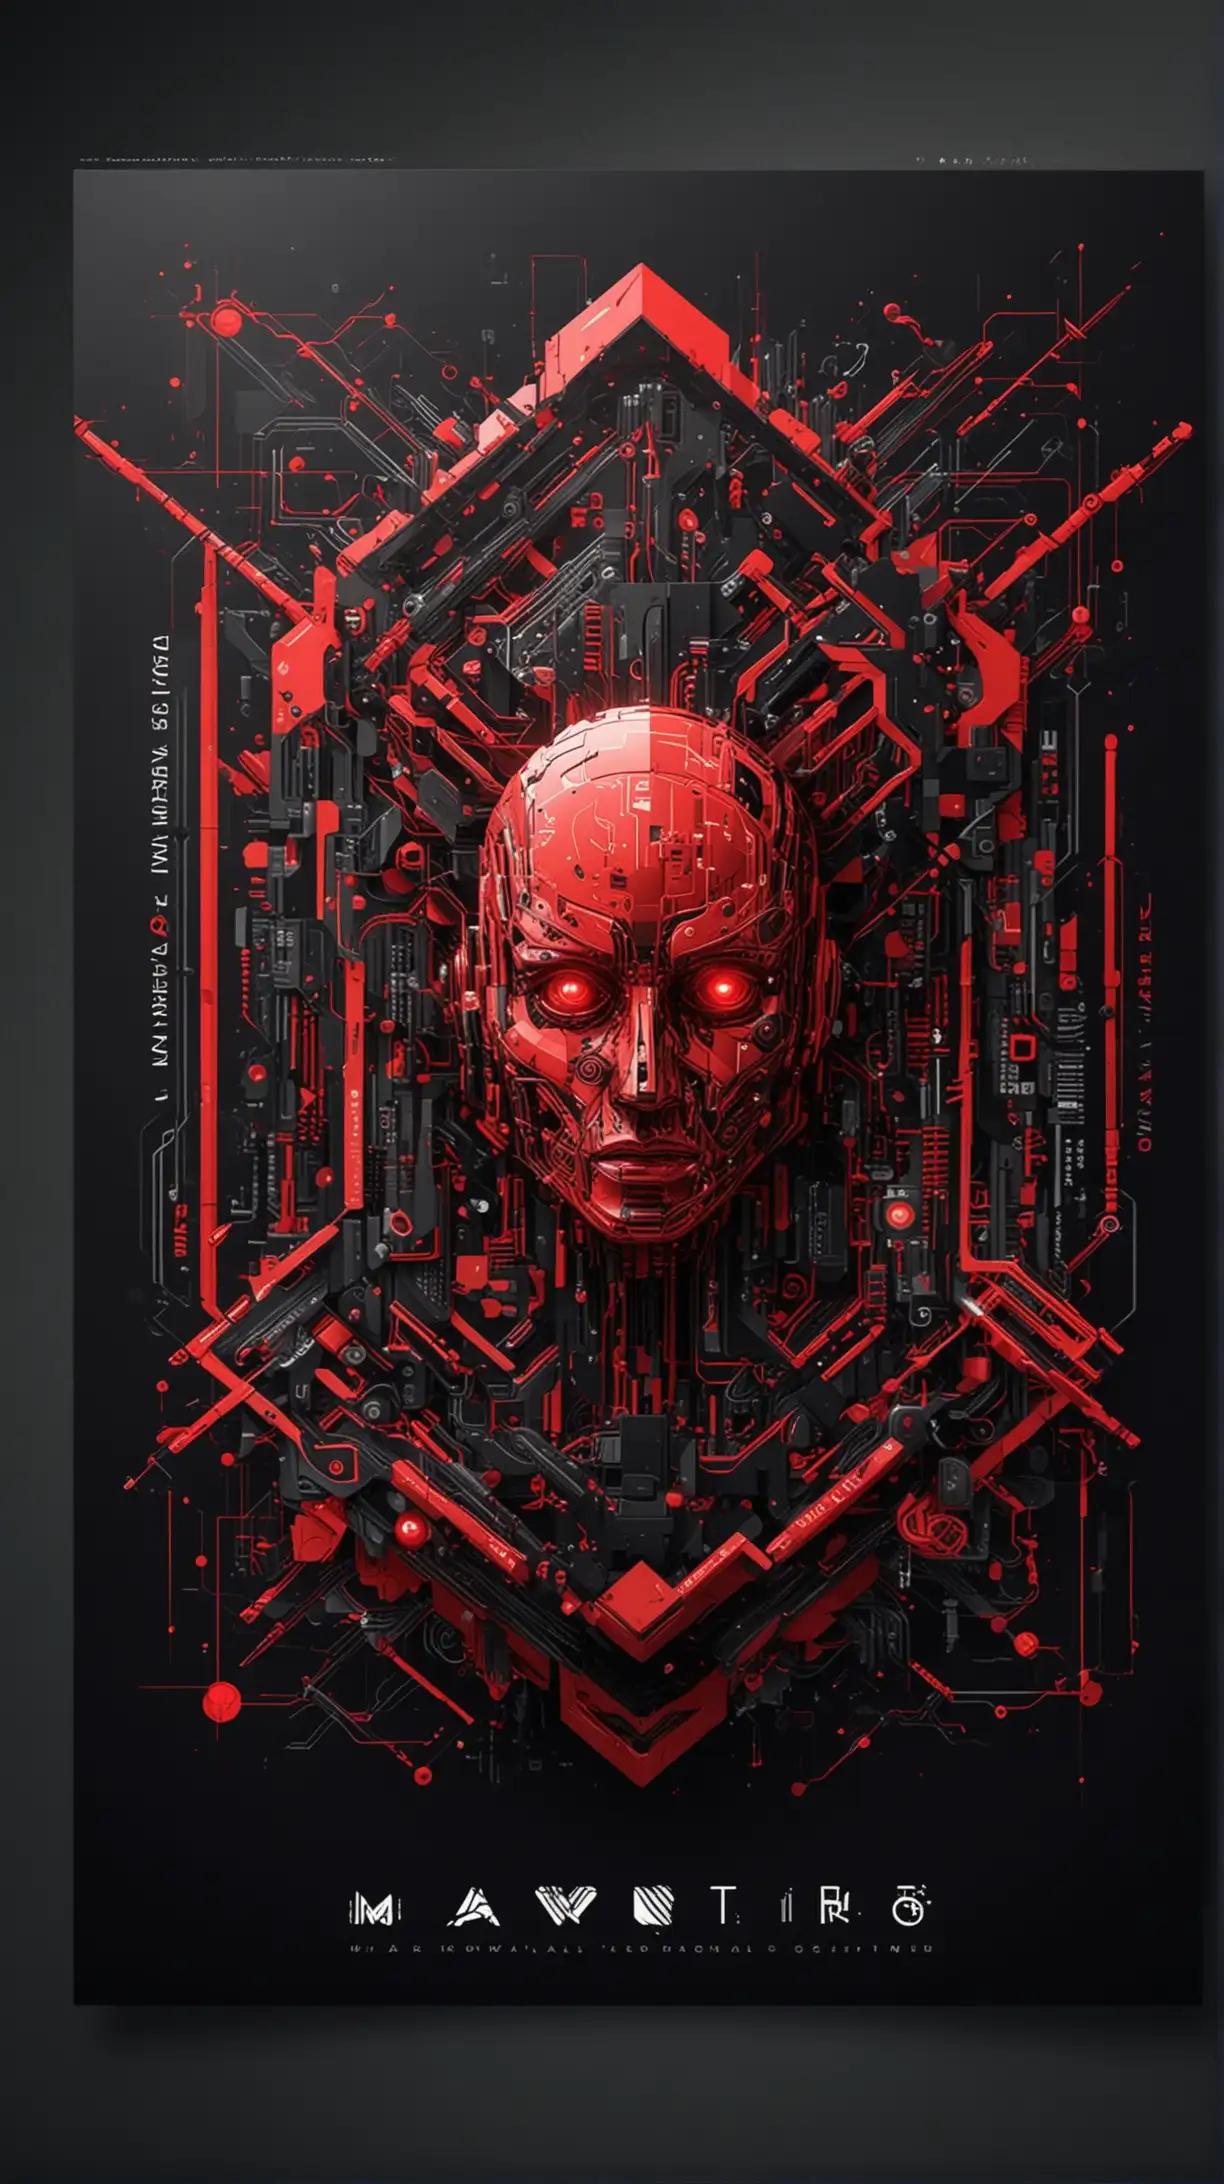 AI Marketing Startup Event Futuristic Red and Black Poster